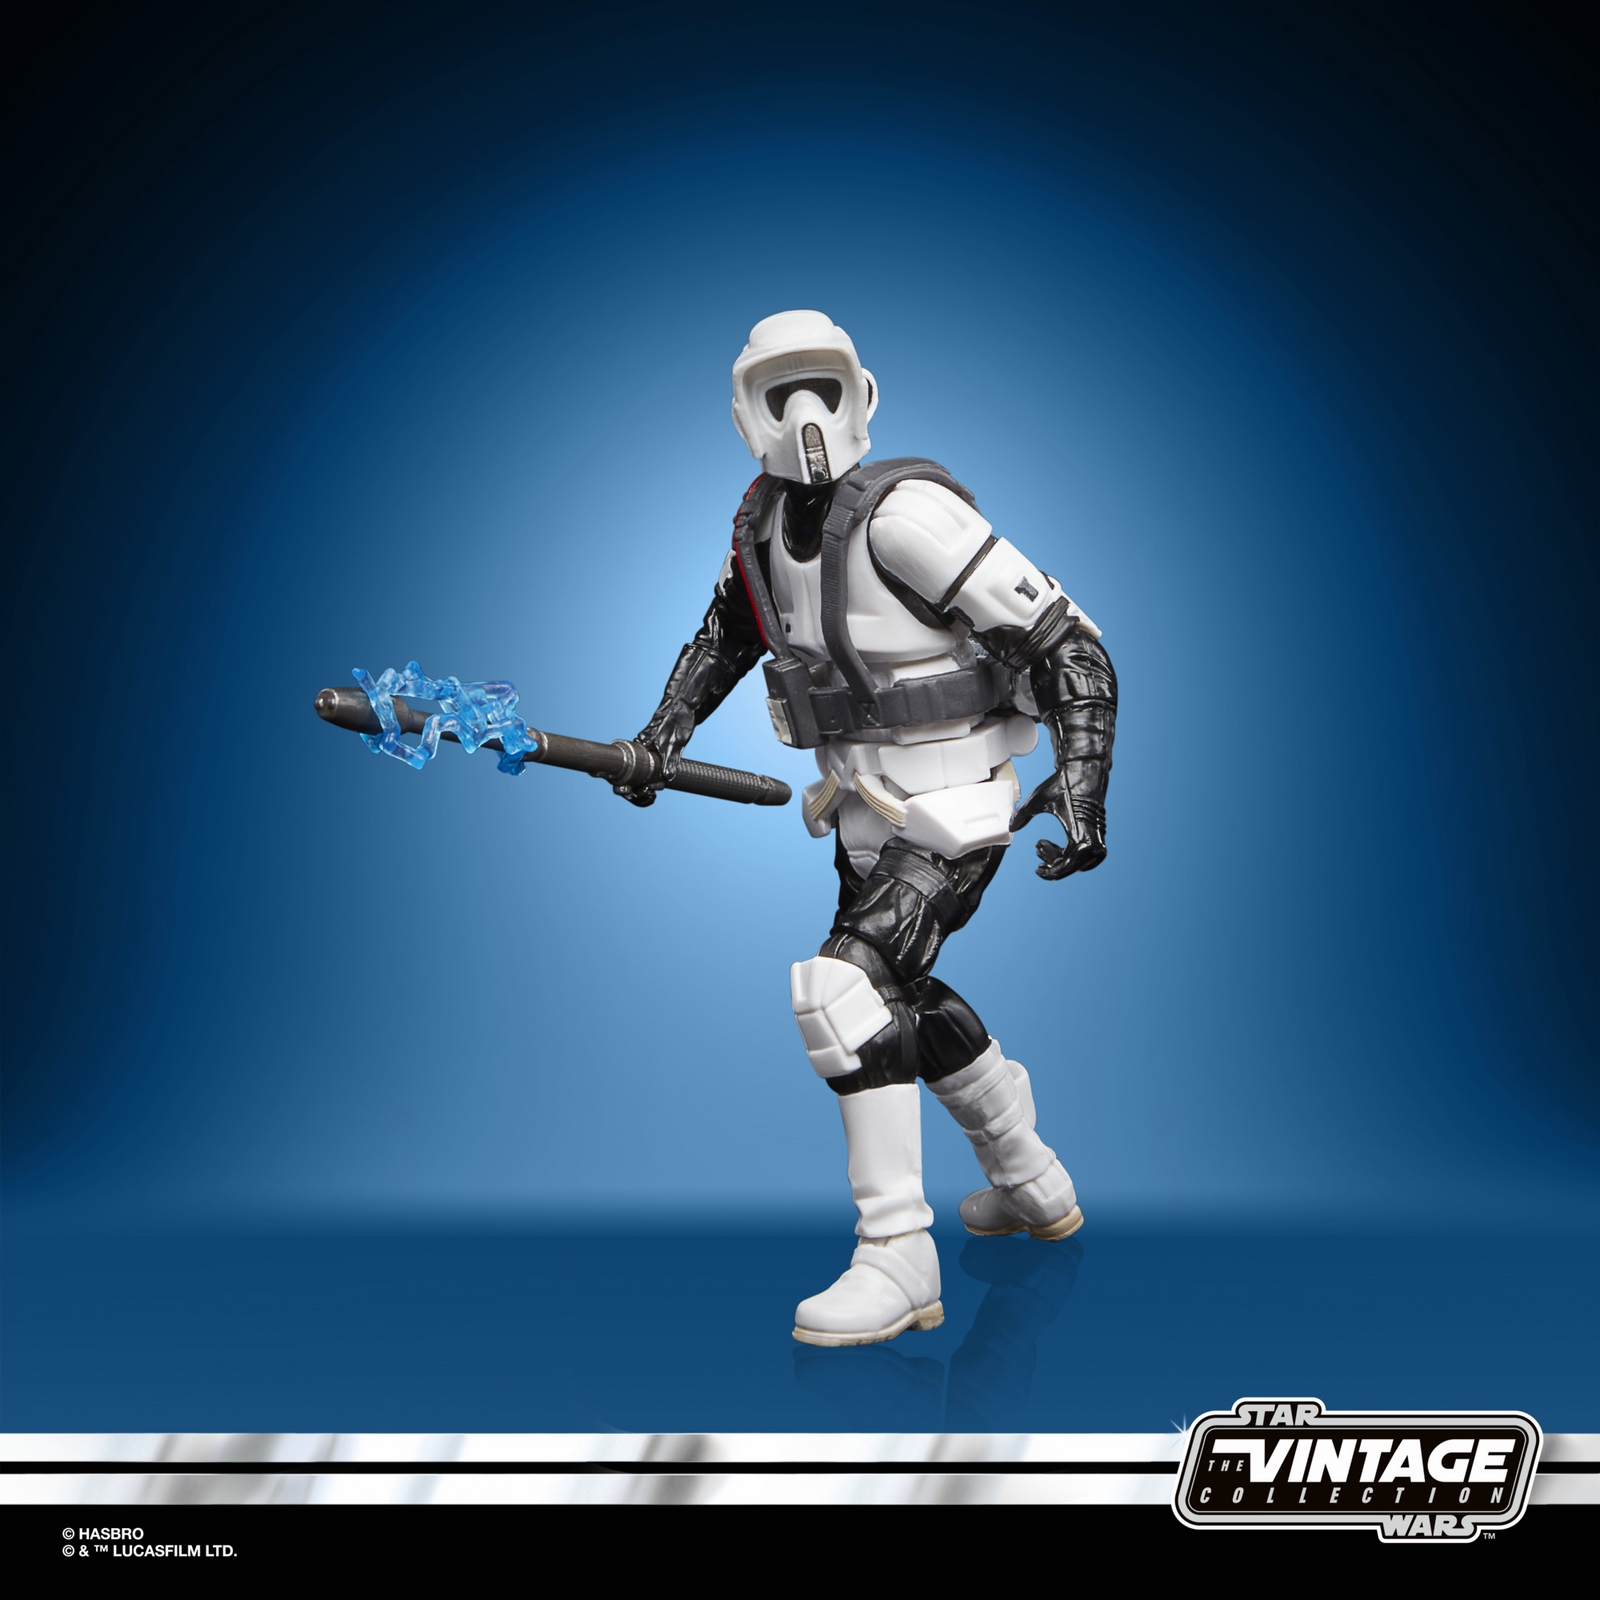 STAR WARS THE VINTAGE COLLECTION GAMING GREATS 3.75-INCH SHOCK SCOUT TROOPER Figure (7).jpg